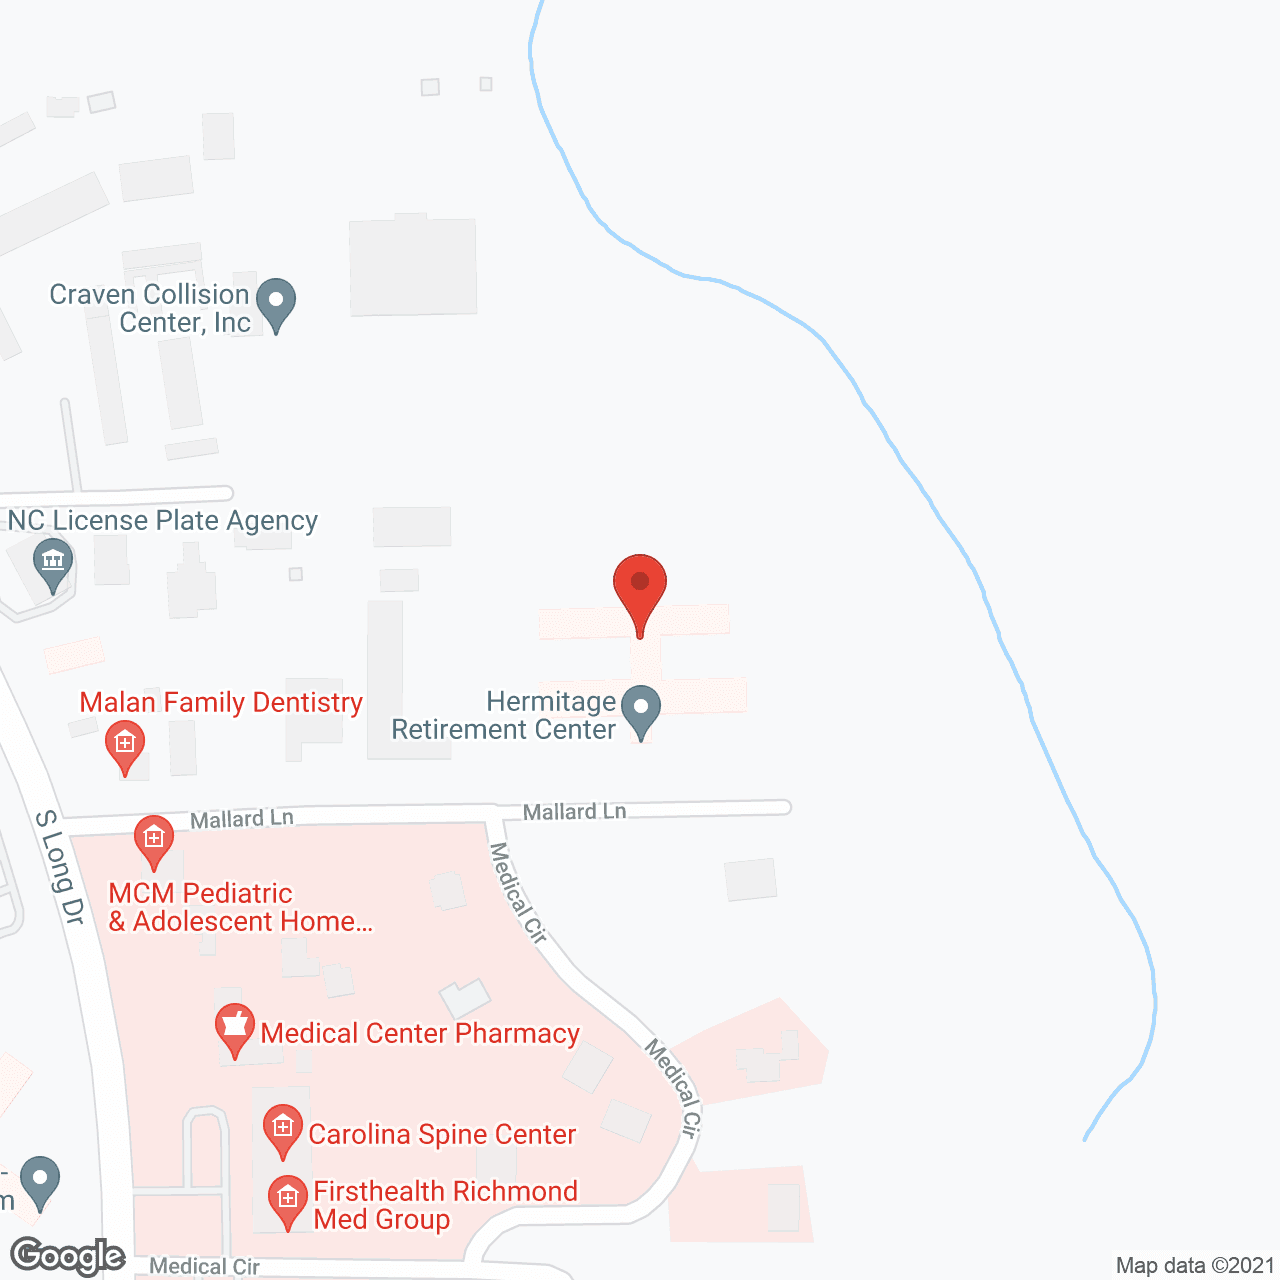 Integrity Hermitage Retirement Center in google map